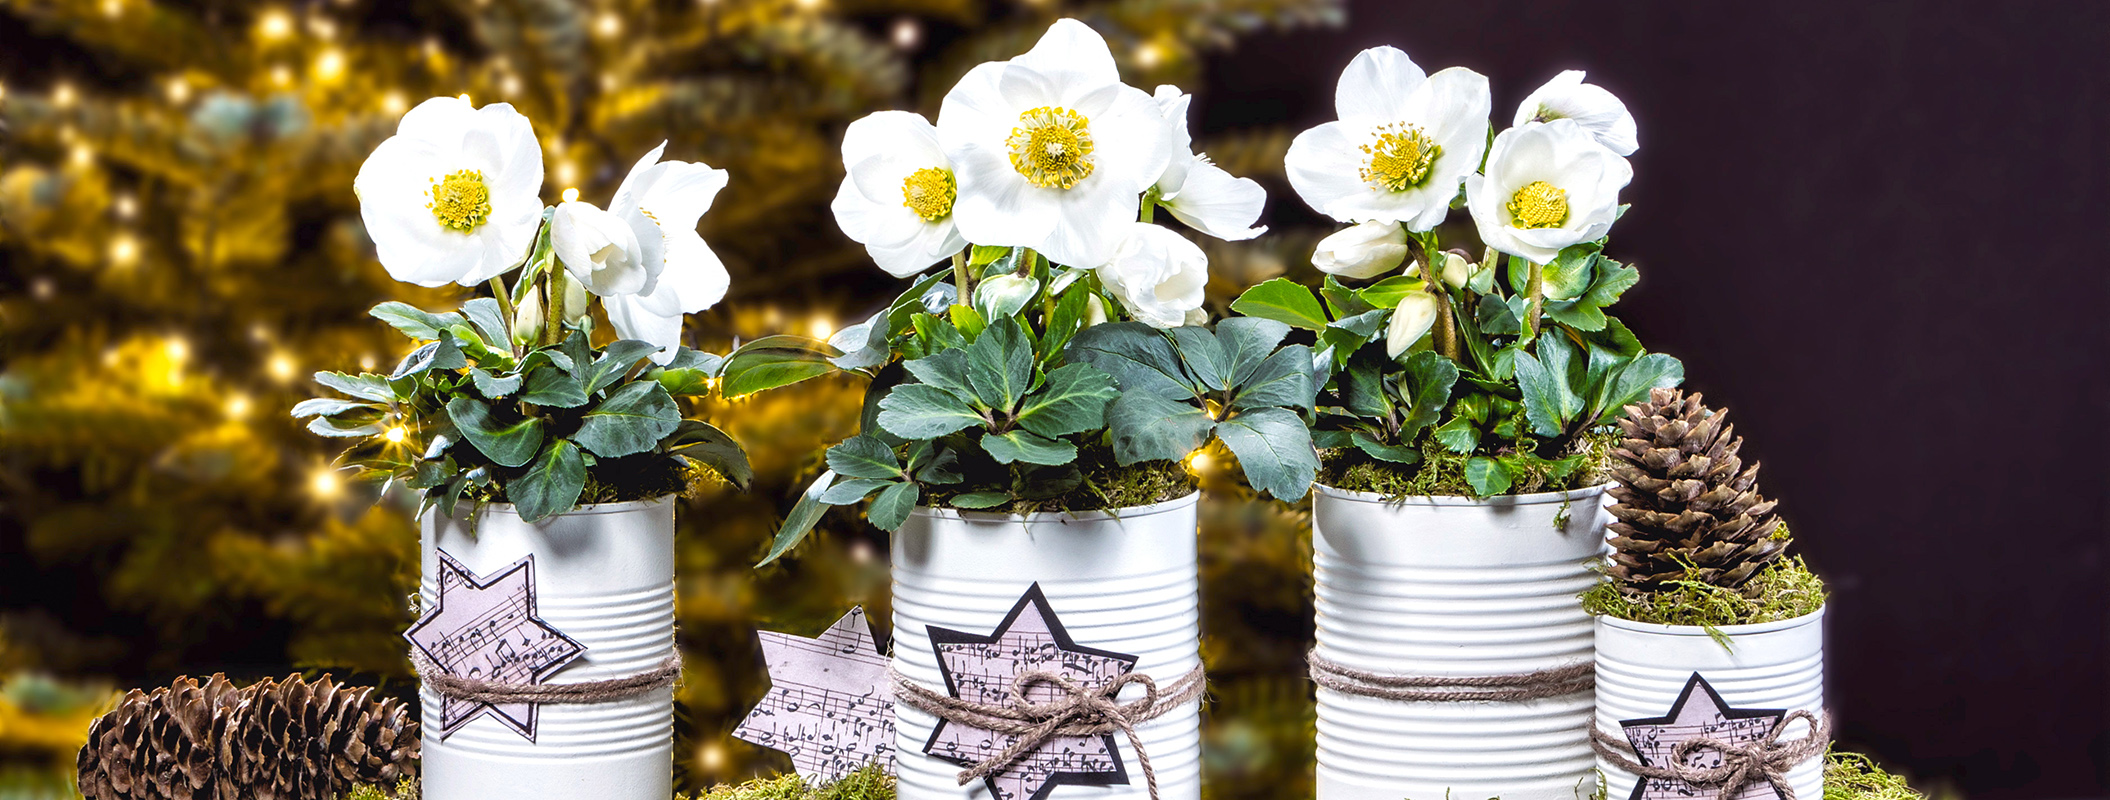 Upcycling - Festive can design with Christmas Roses